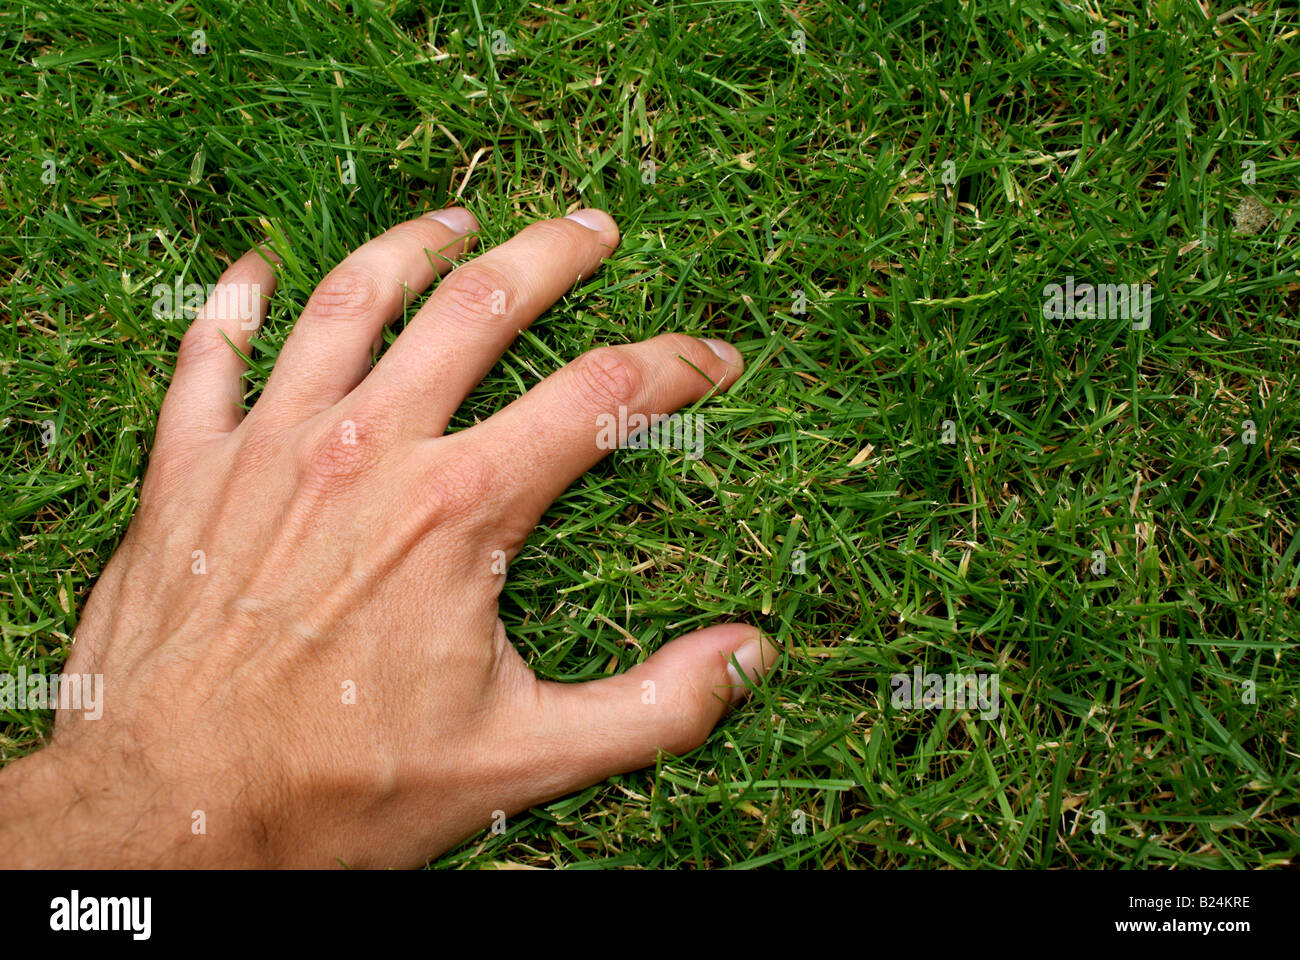 Touching grass: what it means and how to do it